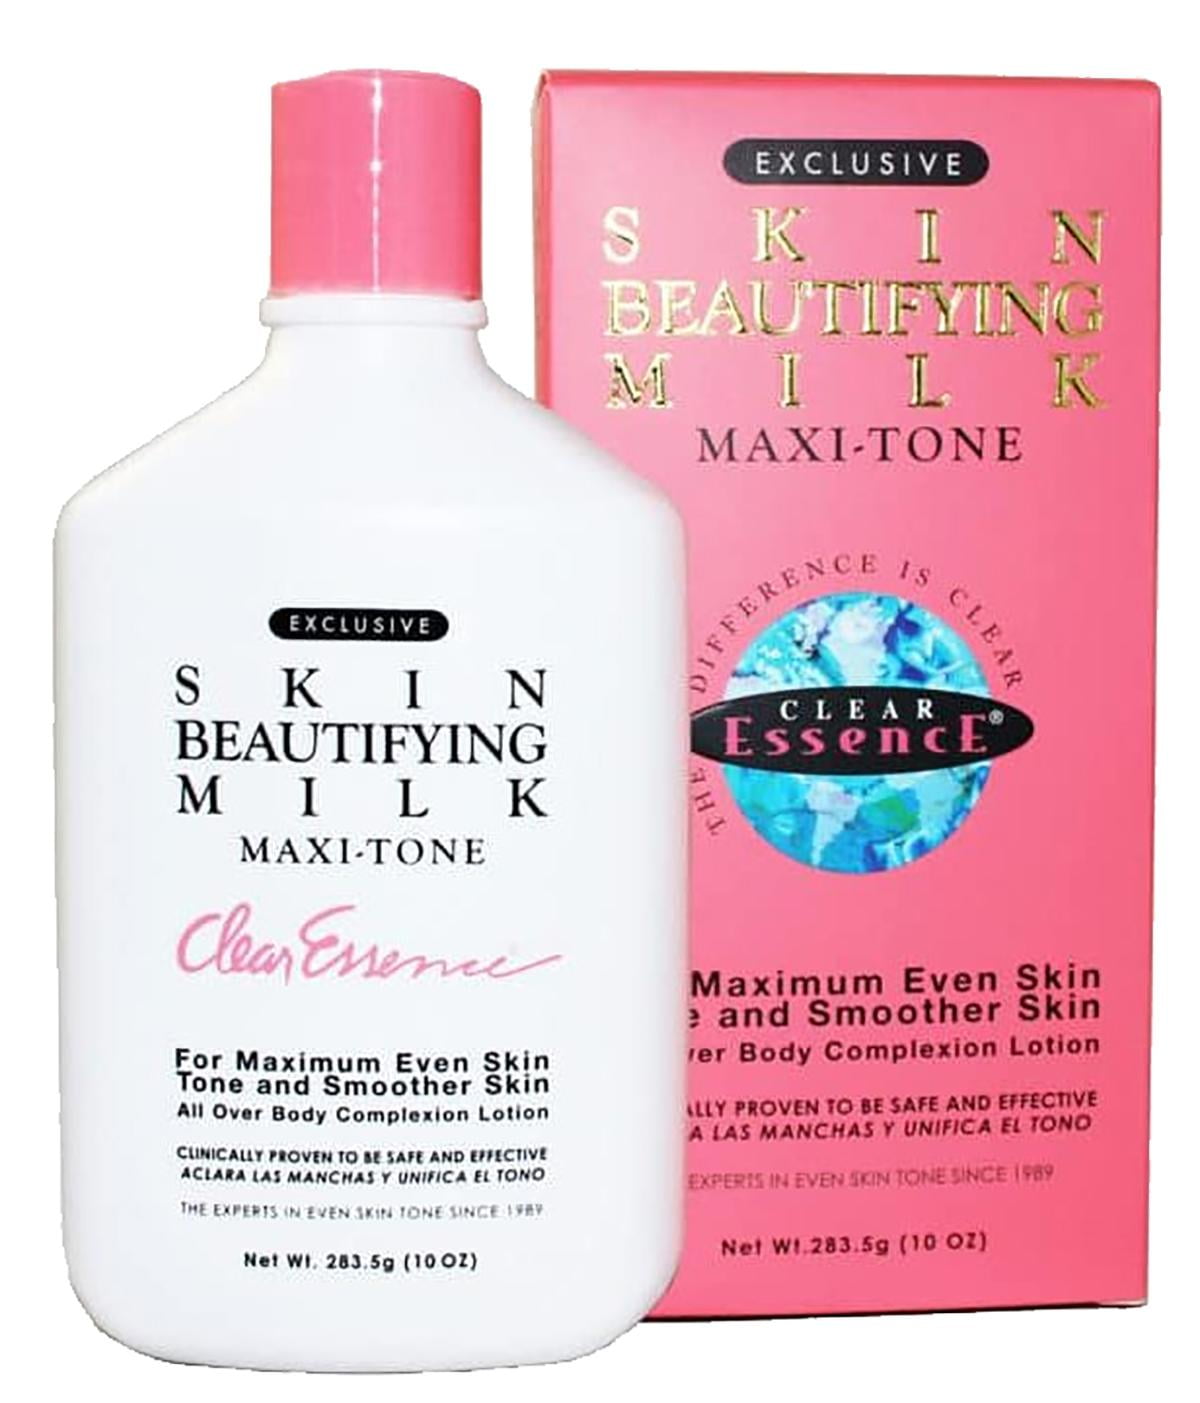 Clear Essence Exclusive Skin Beautifying Milk, No HQ